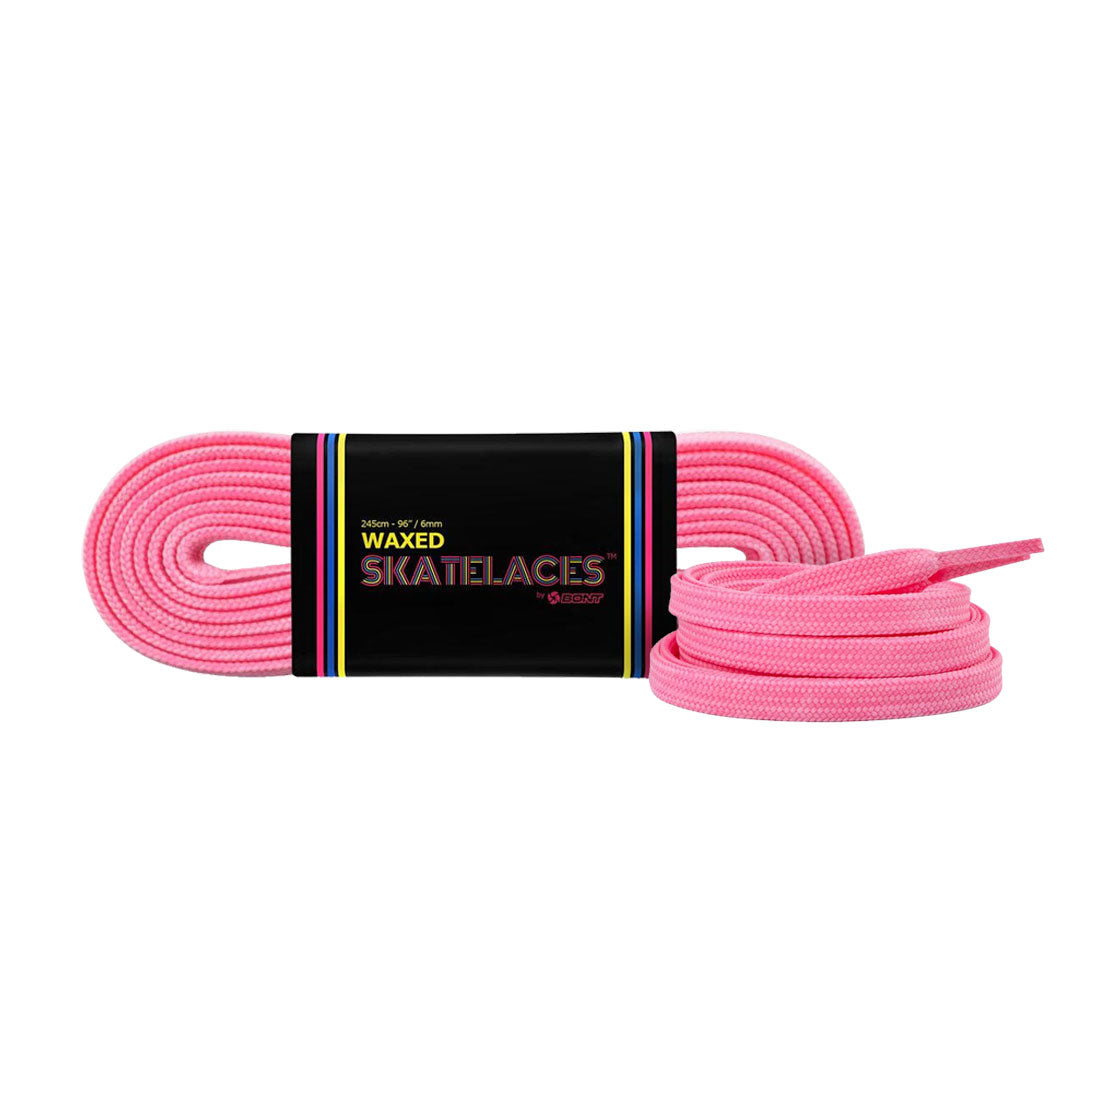 Bont Waxed 6mm Laces - 200cm/79in Cosmo Pink Laces